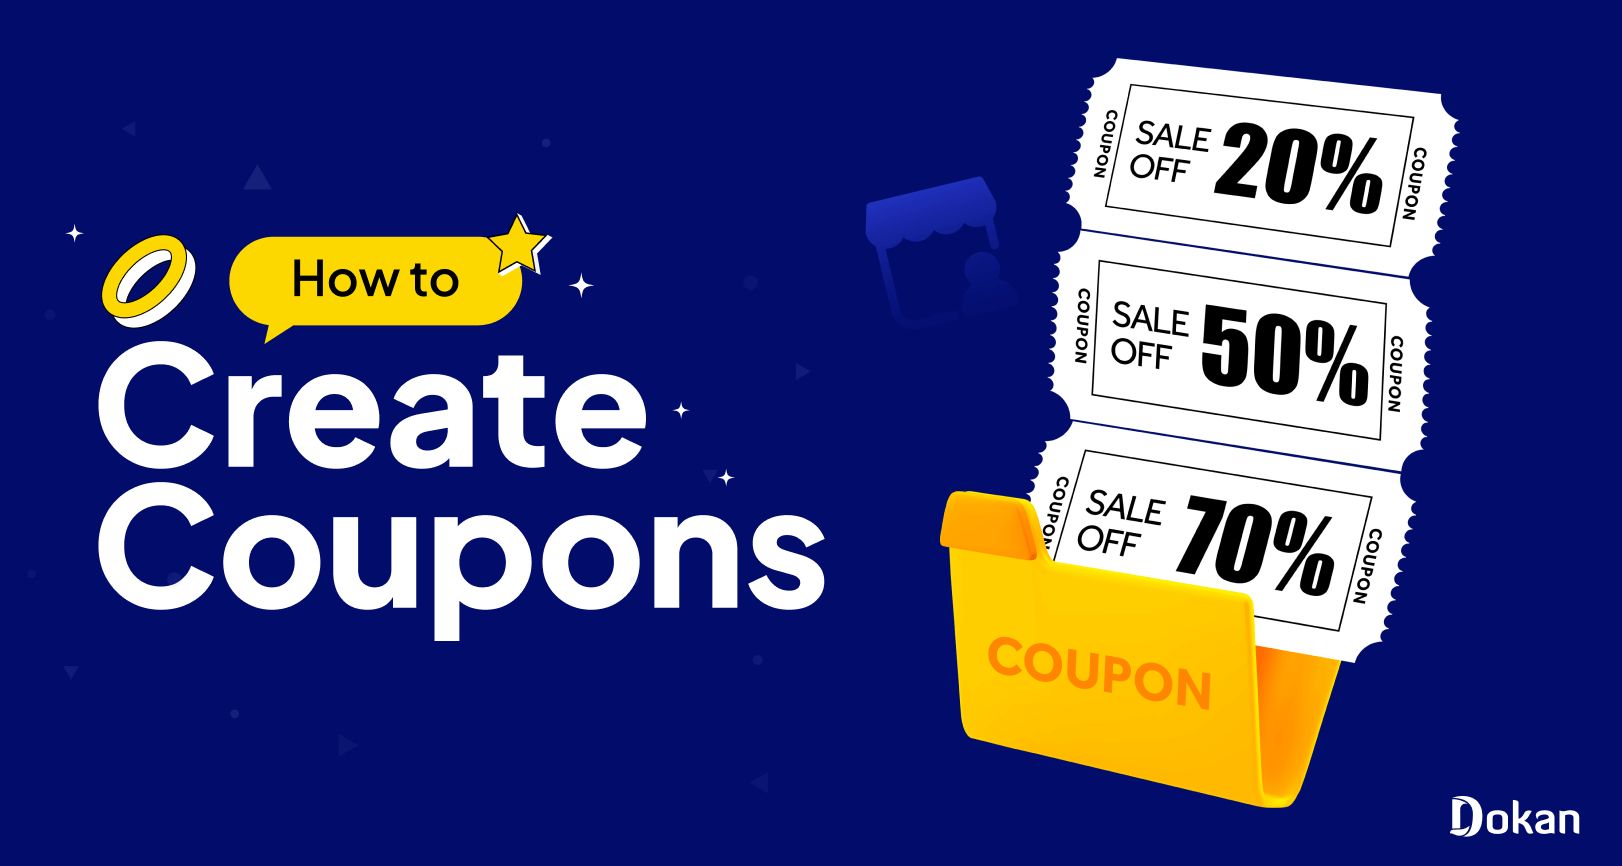 How to Create Coupons in Dokan (Admin Coupons+Vendor Coupons)